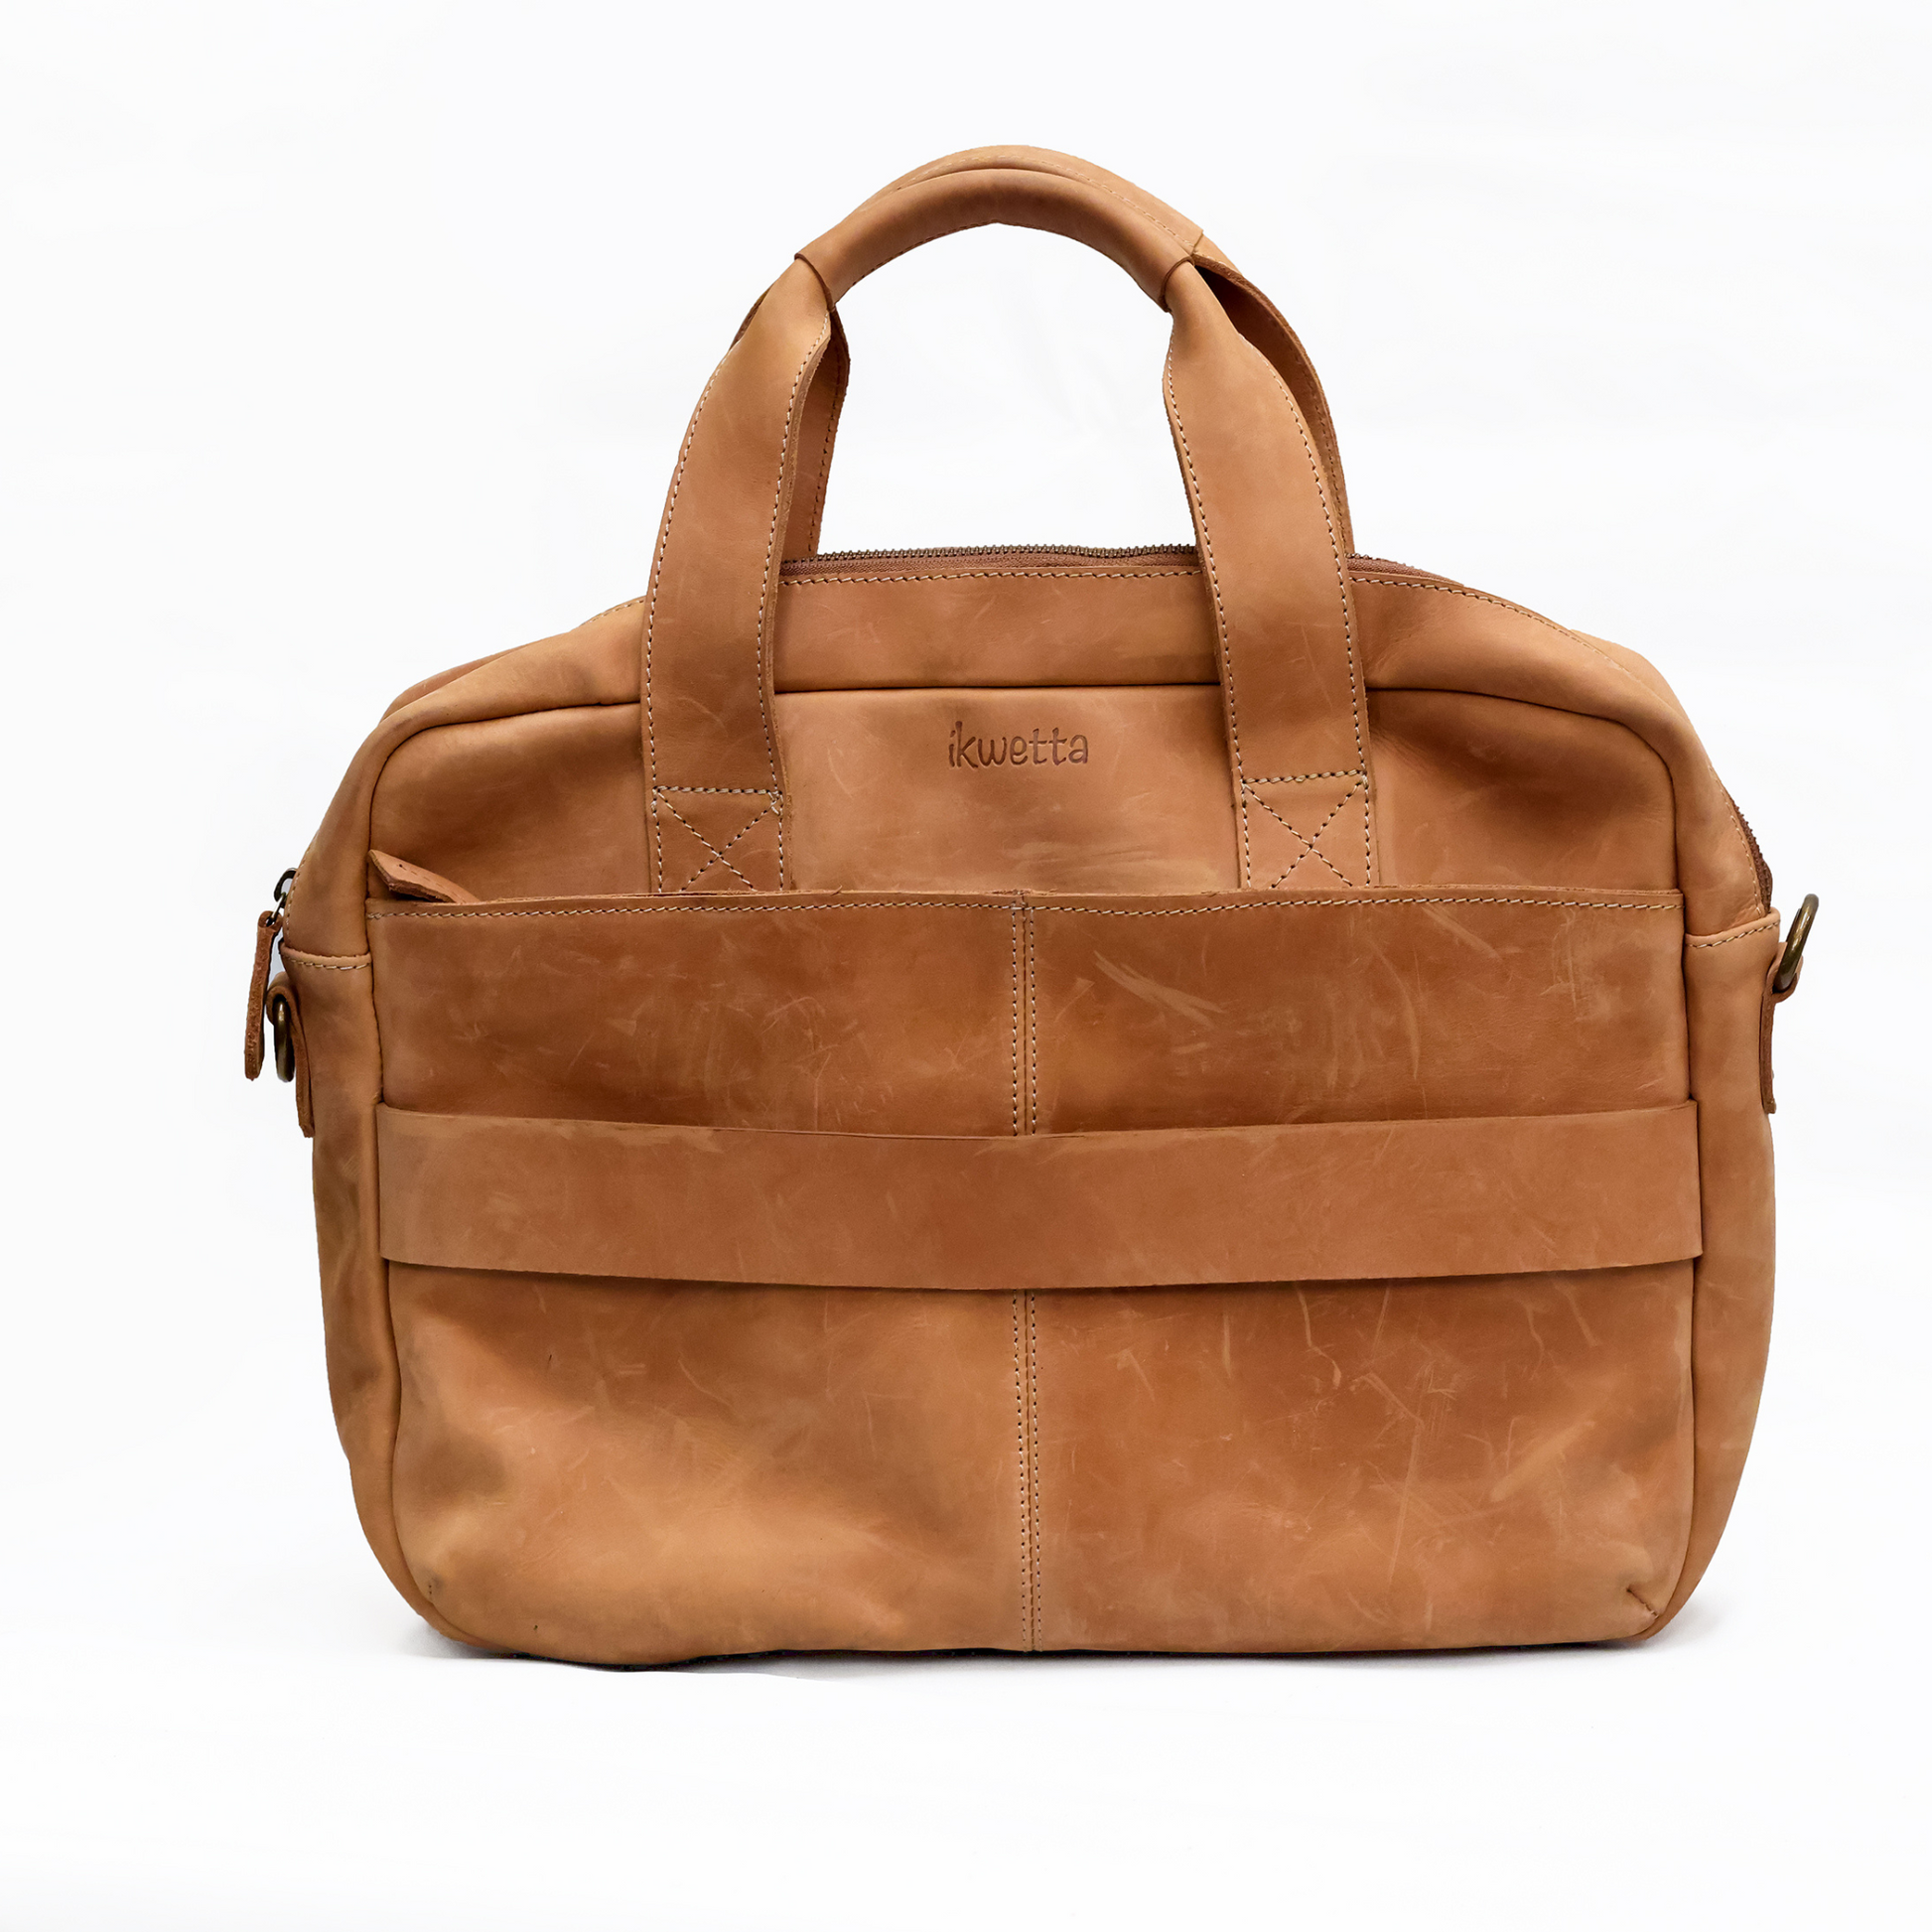 Luxcon messenger bag in tan oil pull up leather